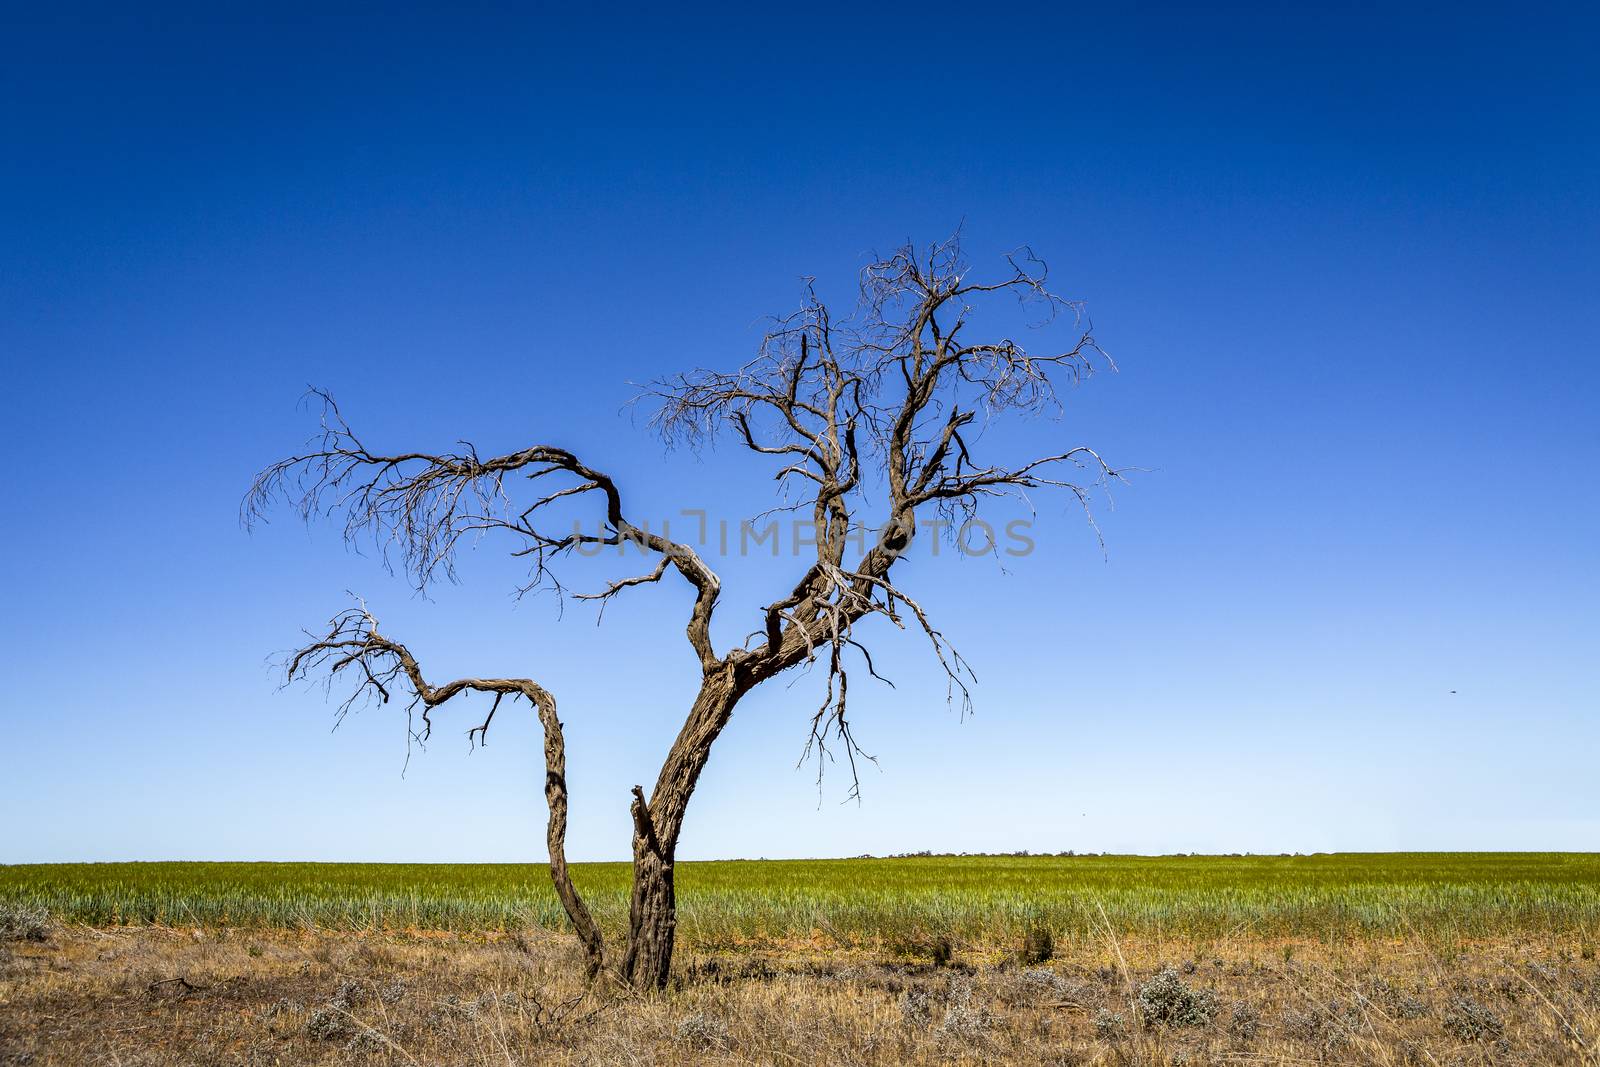 Lone tree in outback Australia by lovleah